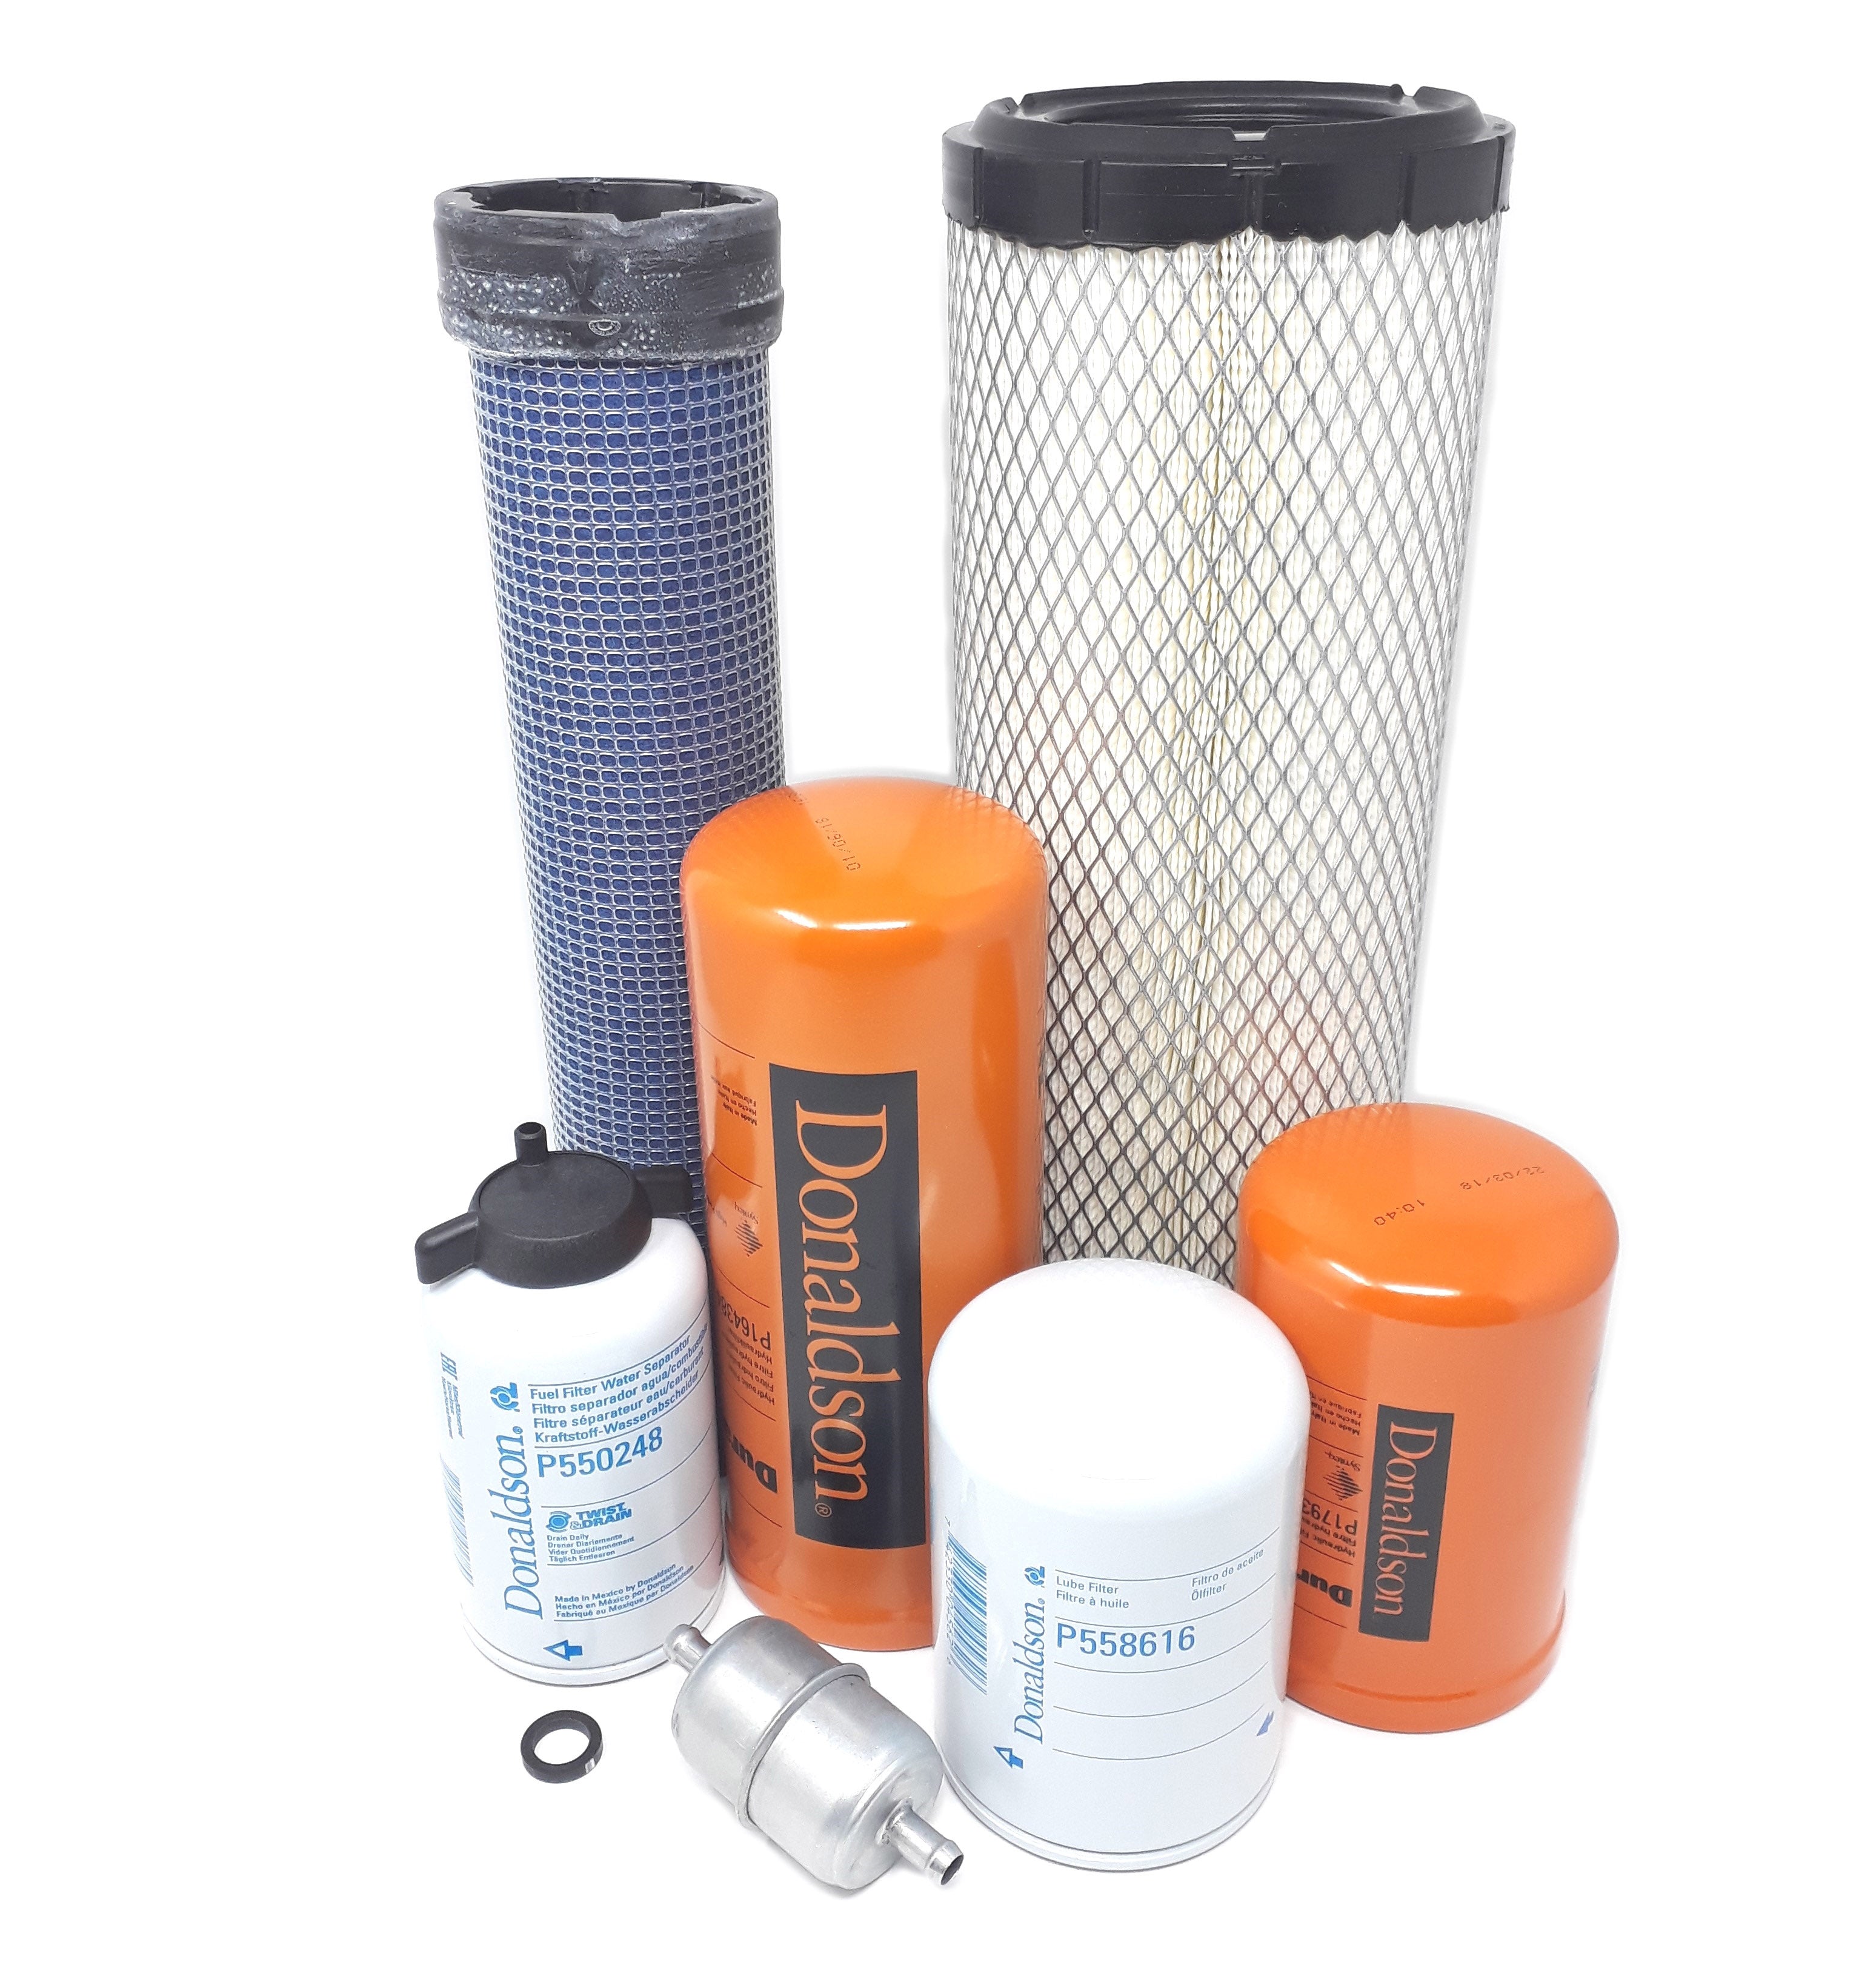 P821575 P822858 Air Filter Set For Donaldson FPG05 Air Cleaners Premium Quality